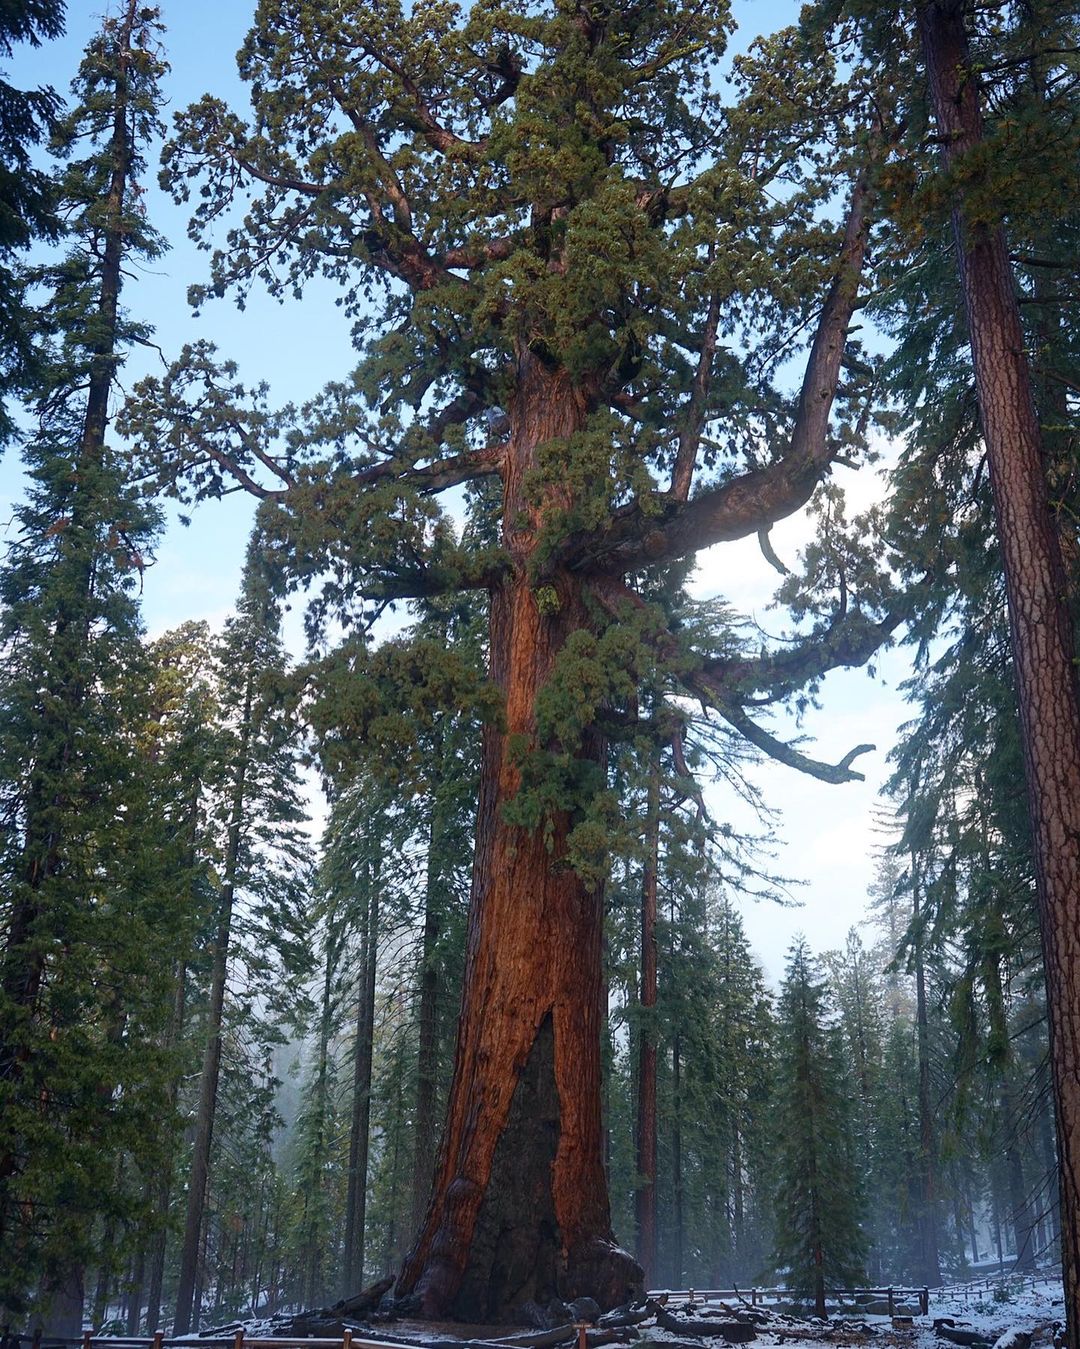 "Sequoia giganteum, the giant sequoia tree, standing tall in Yosemite National Park."